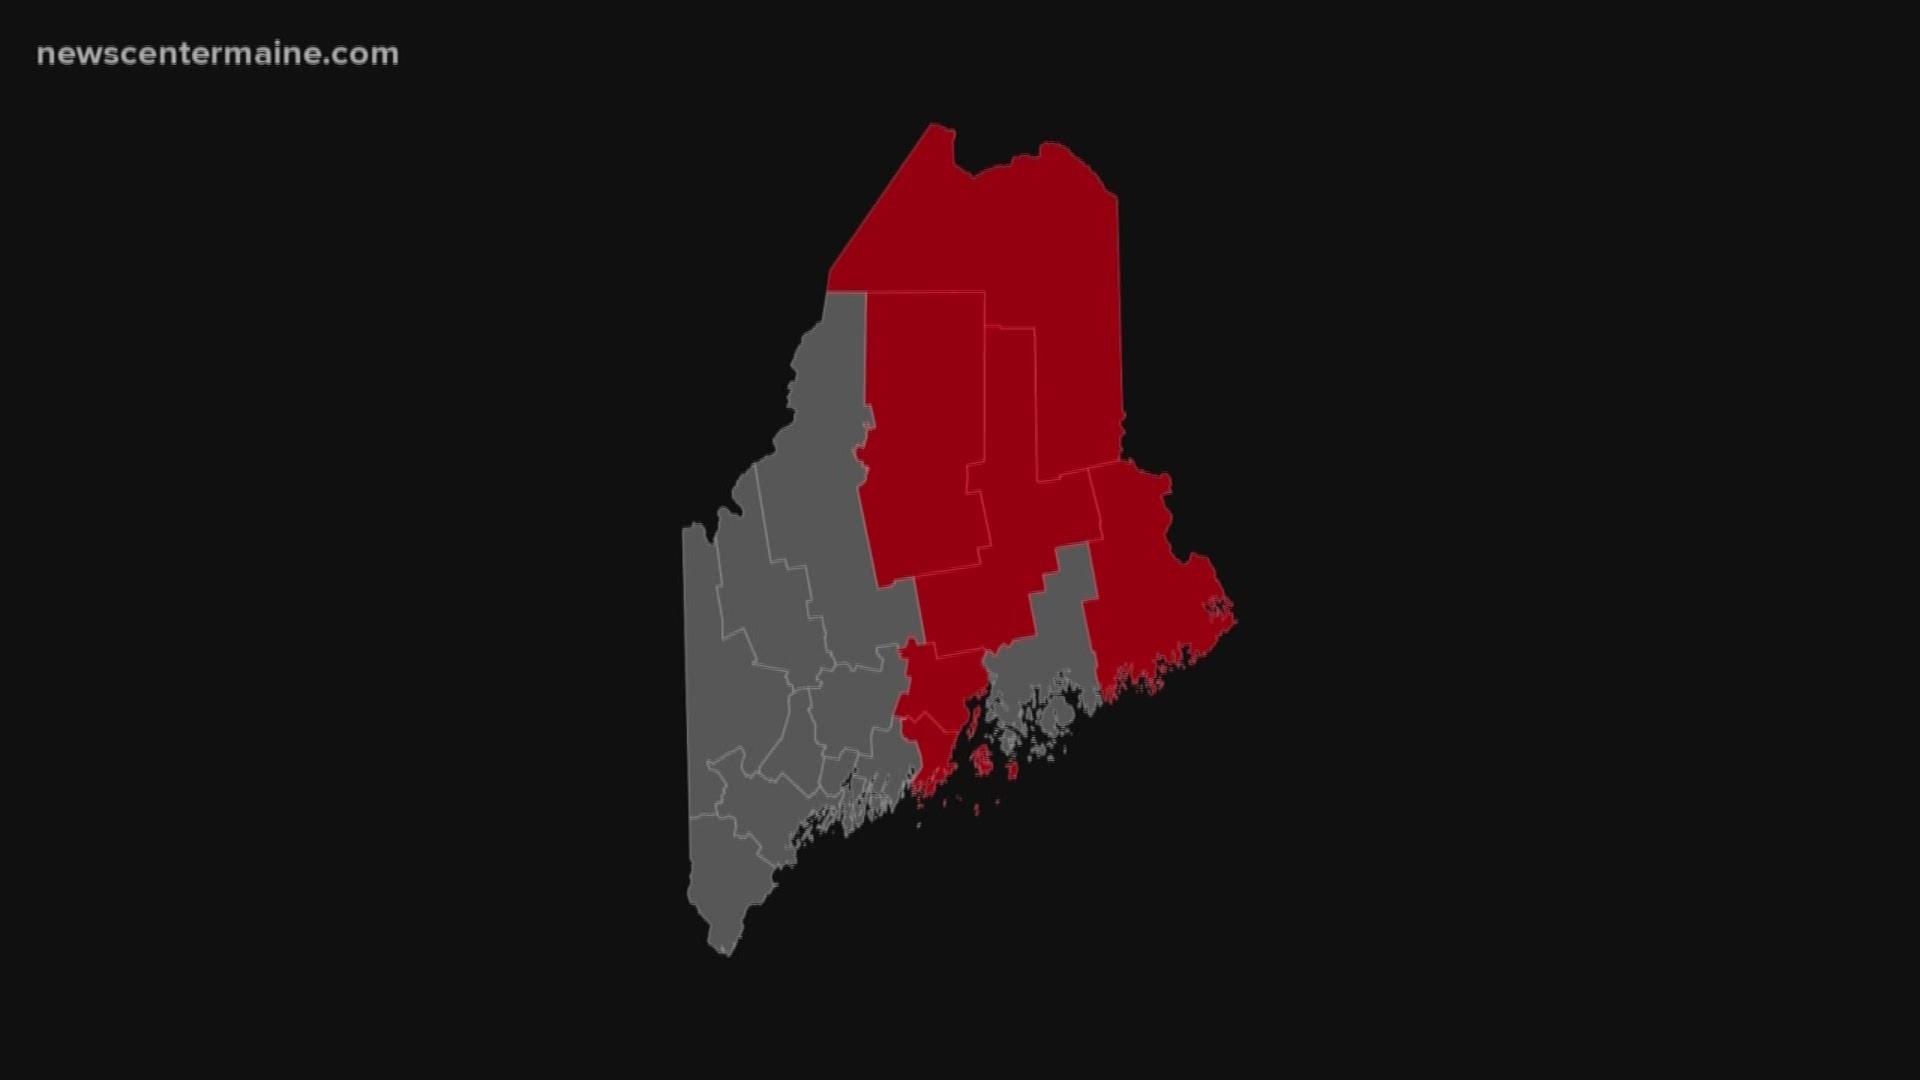 As of July 2018, the census estimates the total population of Maine at 1,338,404 people.